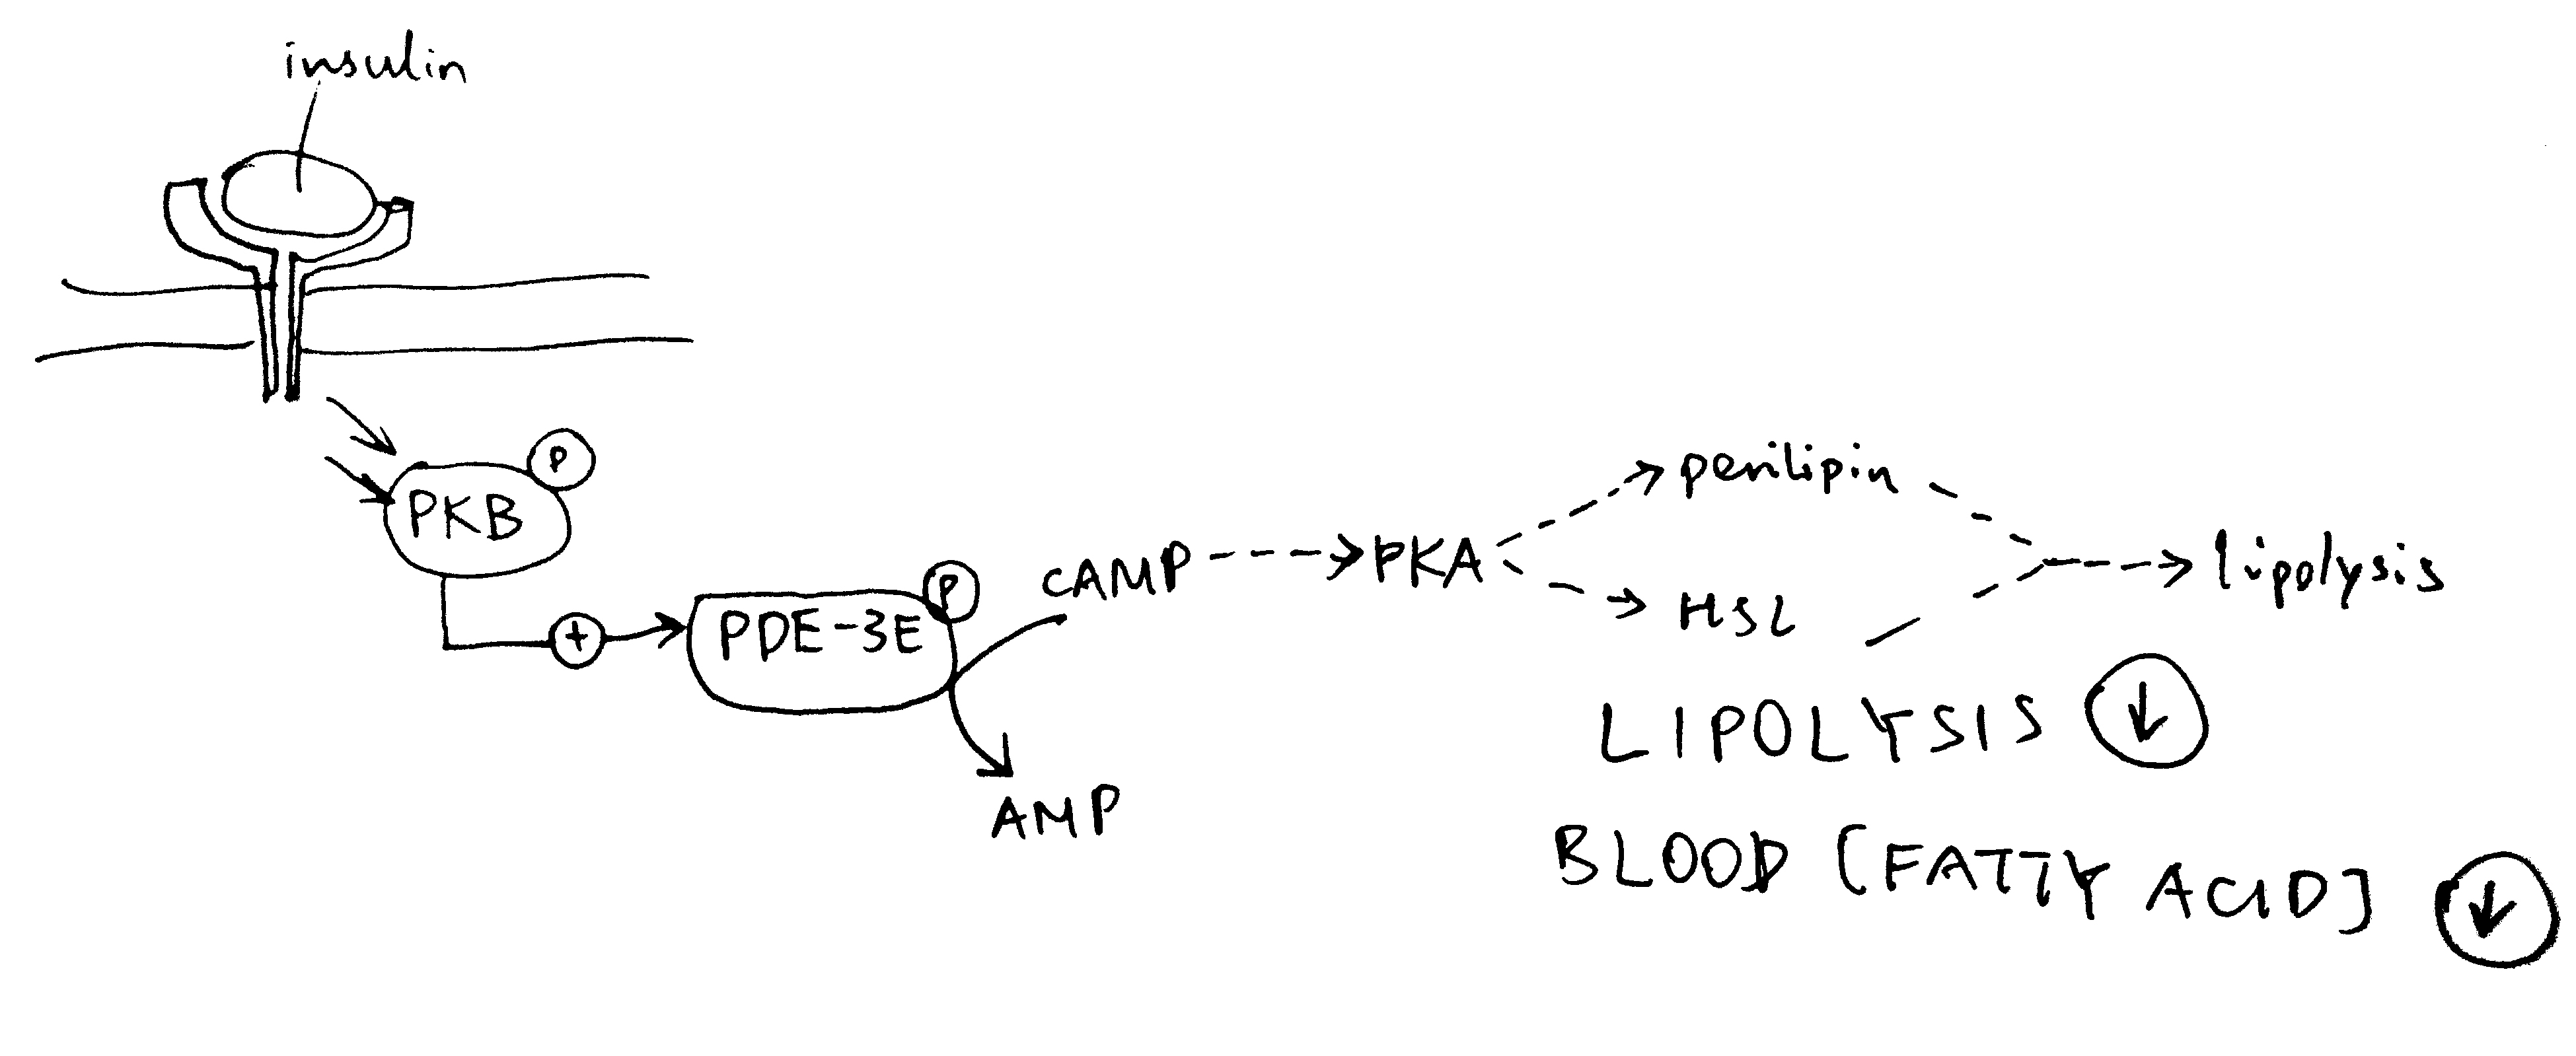 Inhibition of lipolysis by insulin. Insulin activates PKB, which phosphorylates and thus activates the phosphodiesterase PDE-3B. PDE-3B de-cyclise cAMP, to AMP, thus reducing PKA activity and the lipolytic pathway downstream of PKA.